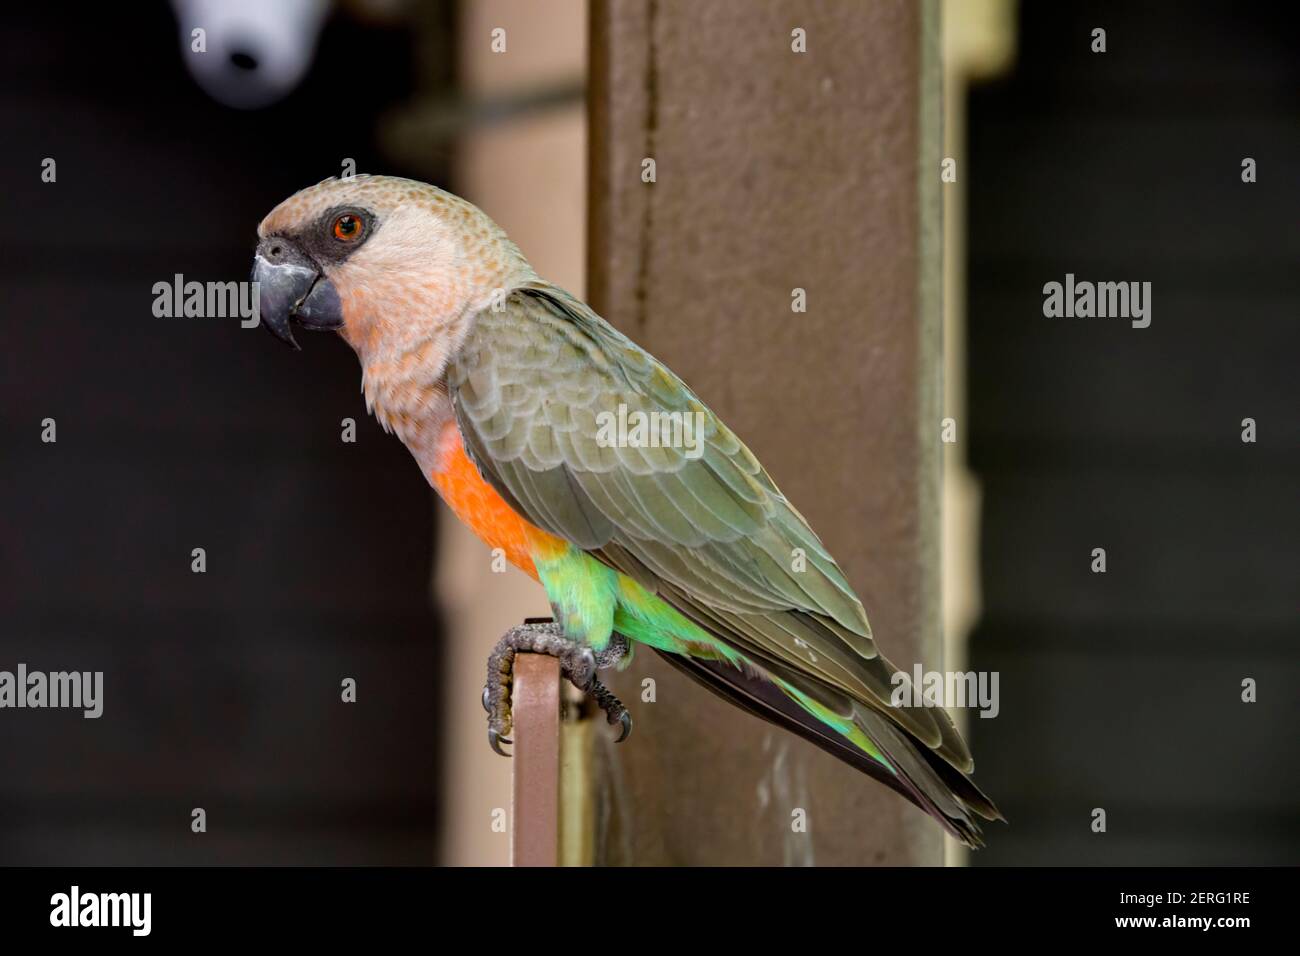 The red-bellied parrot (Poicephalus rufiventris) is a small African parrot. It is a mostly greenish and grey parrot. Males have a bright orange belly Stock Photo